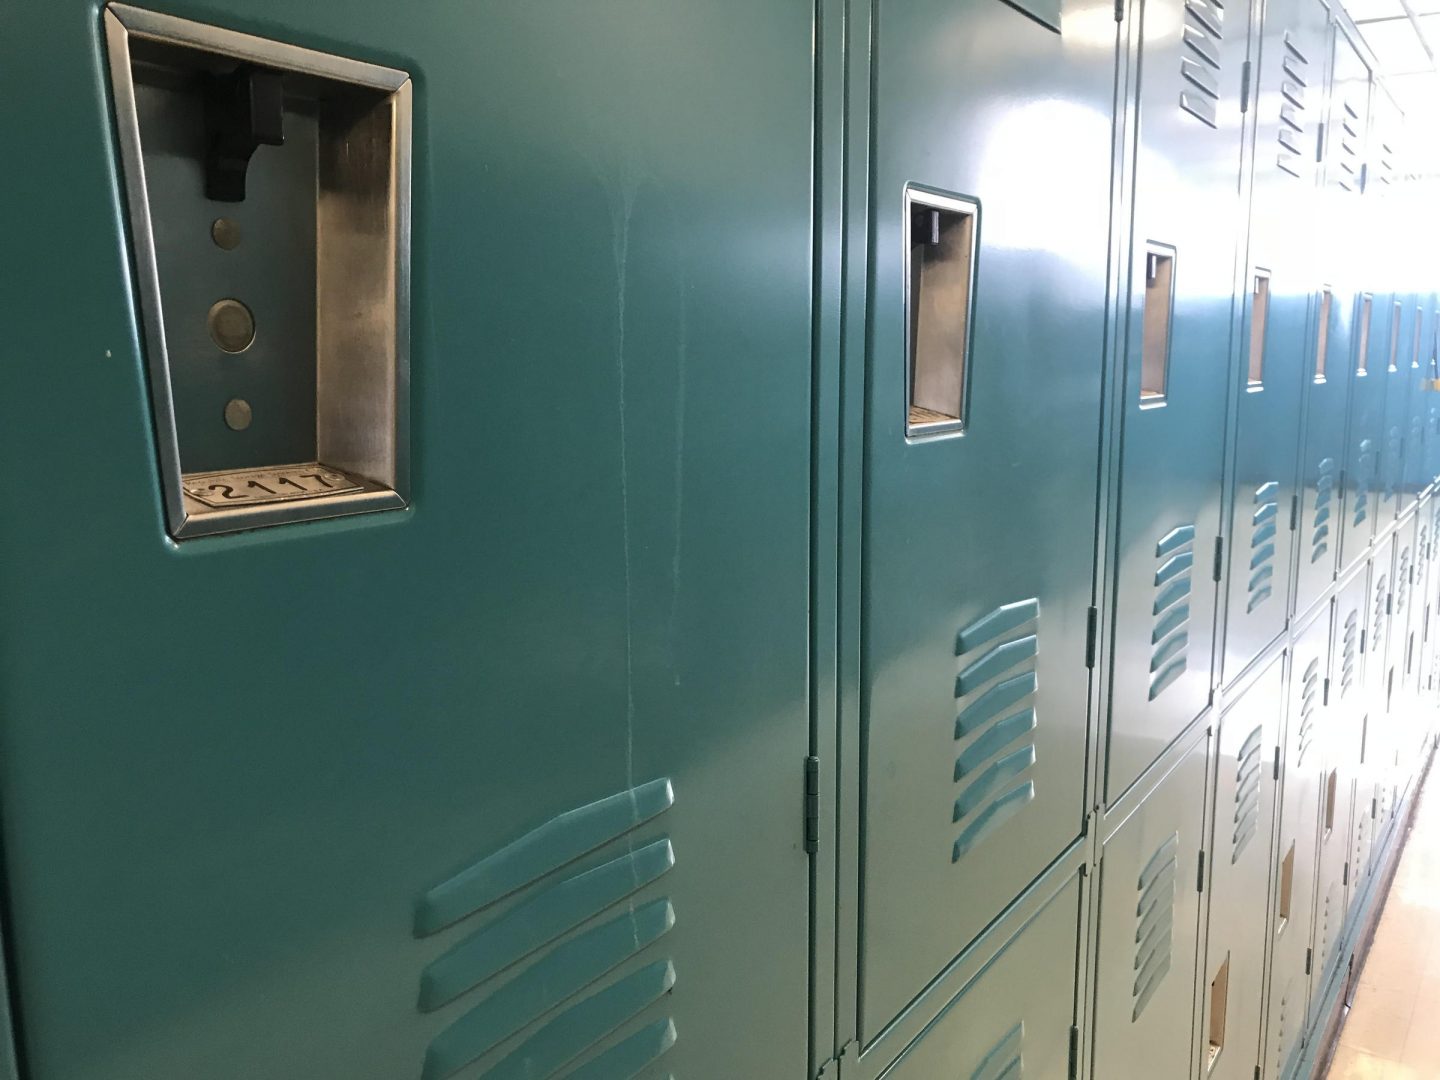 FILE PHOTO: Lockers line a hallway at Brashear Middle School in Pittsburgh.